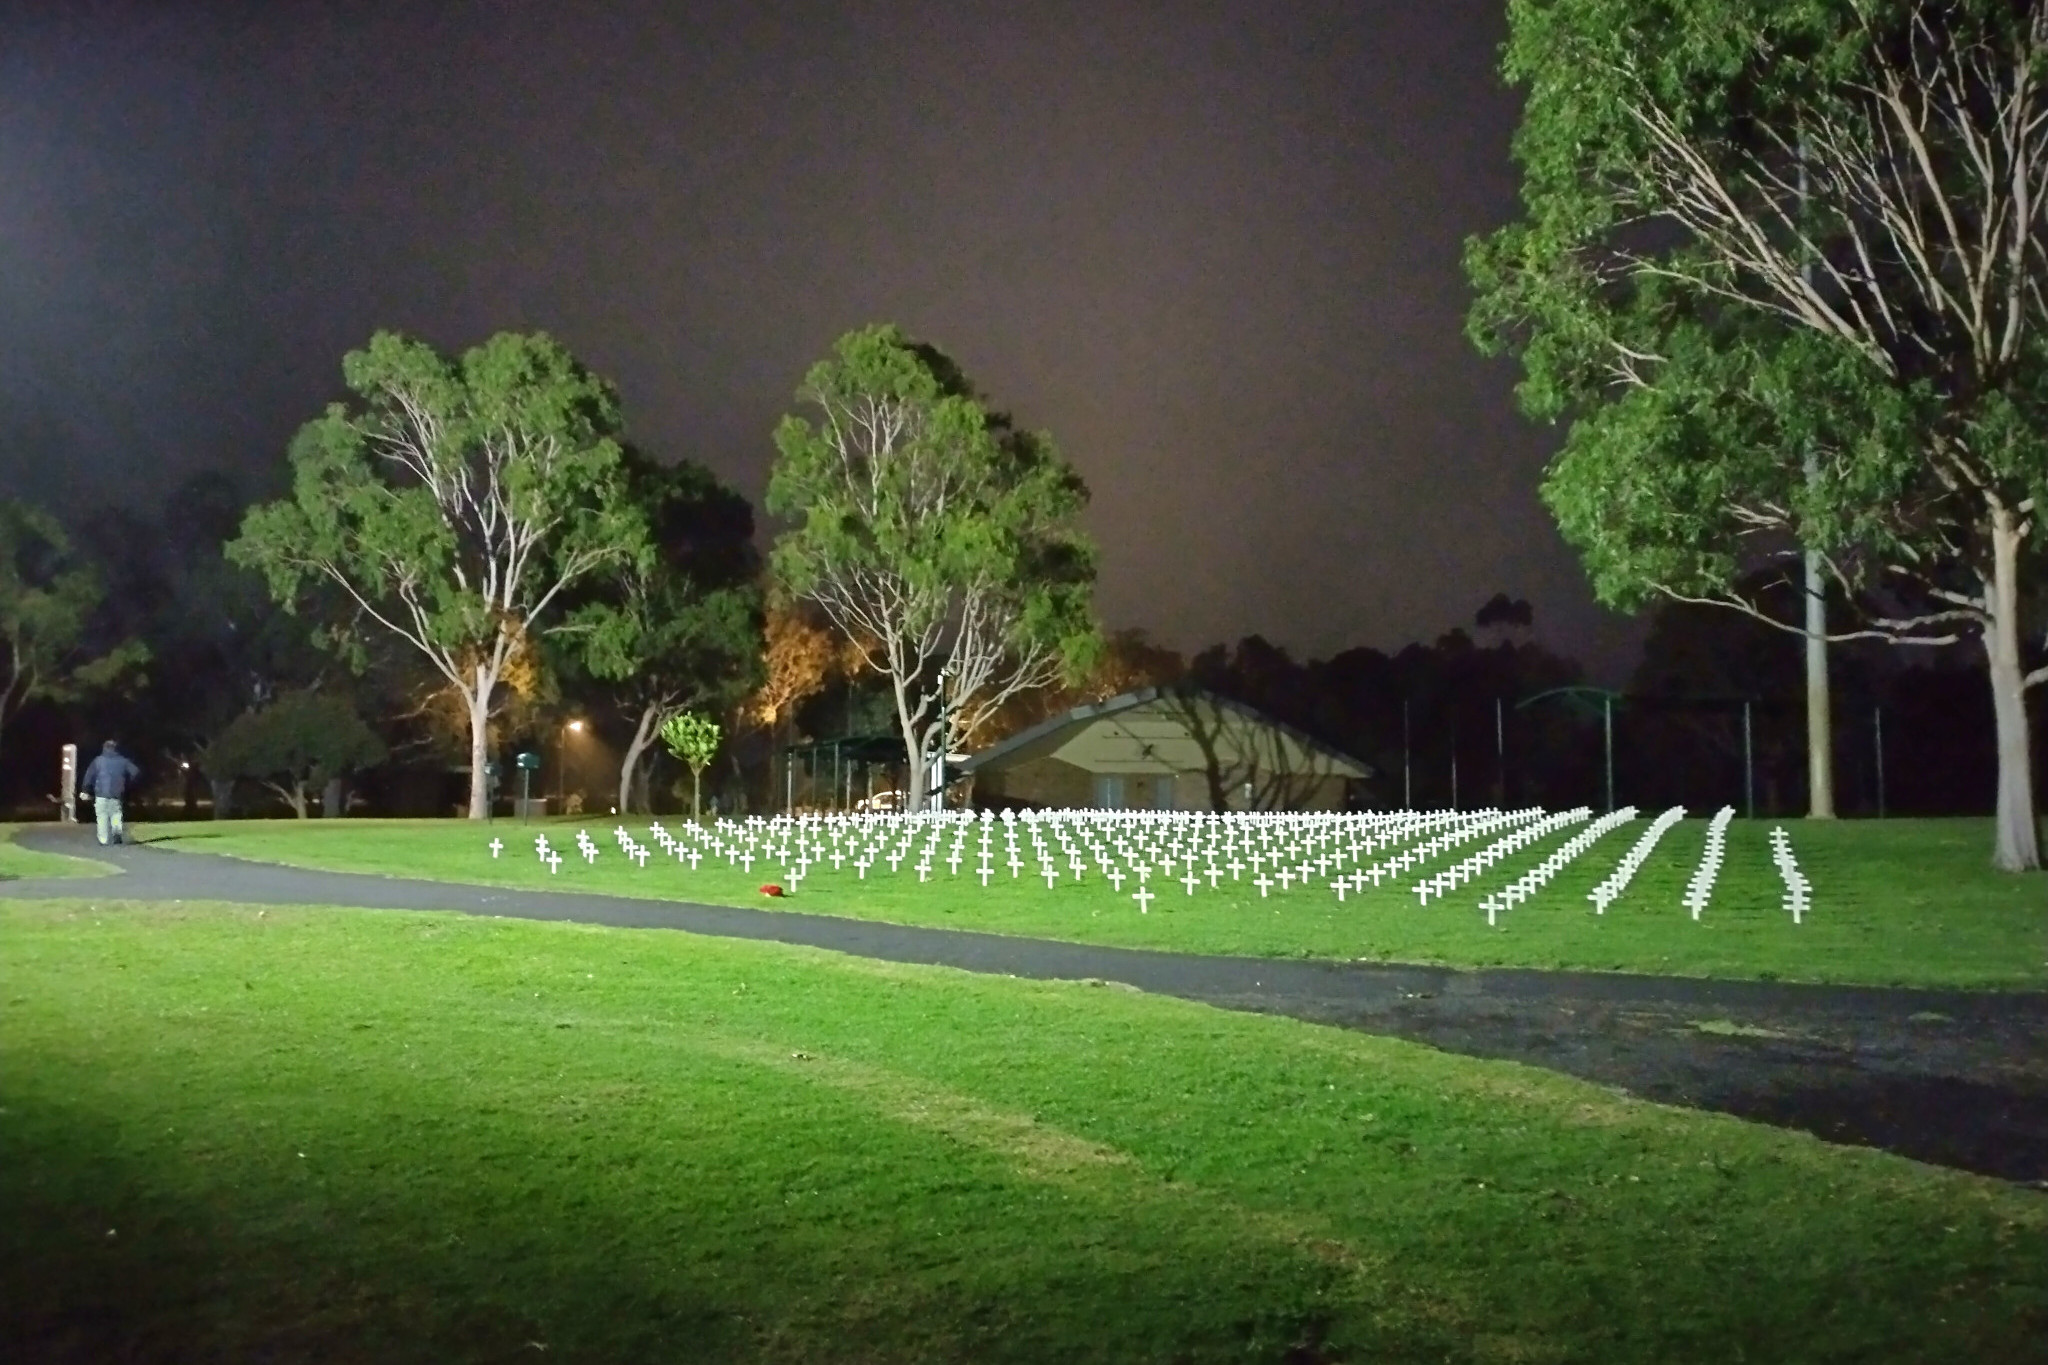 1 In the morning darkness, lights in Sawyer Park shine down on more than 500 crosses, each representing a Horsham person who died in a war.